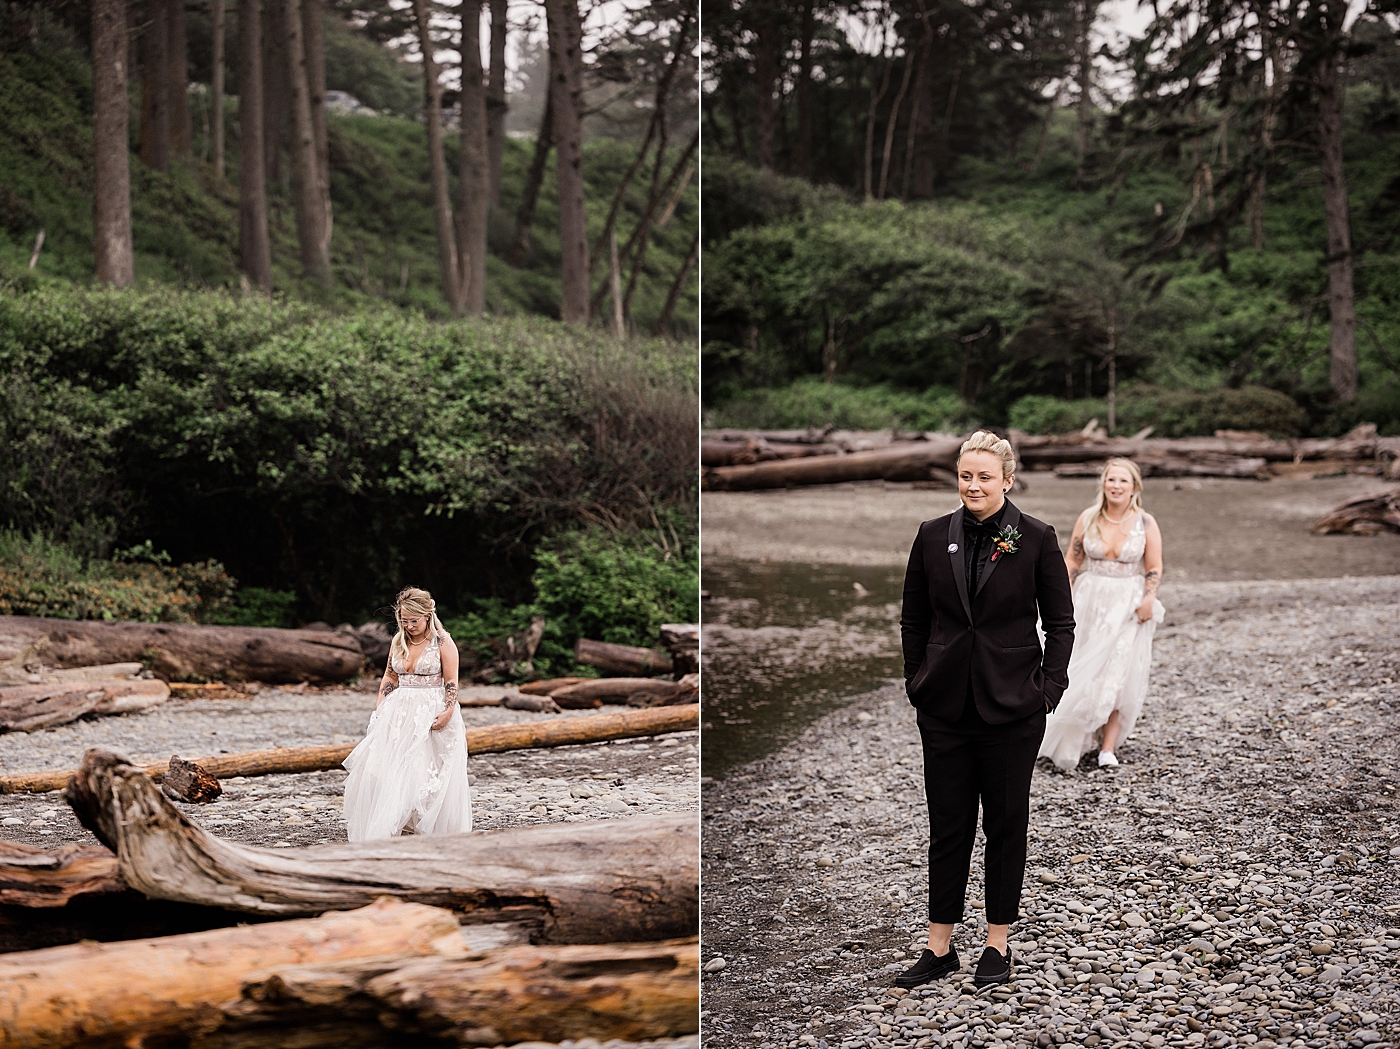 Elopement first look at Ruby Beach | Photo by Megan Montalvo Photography.